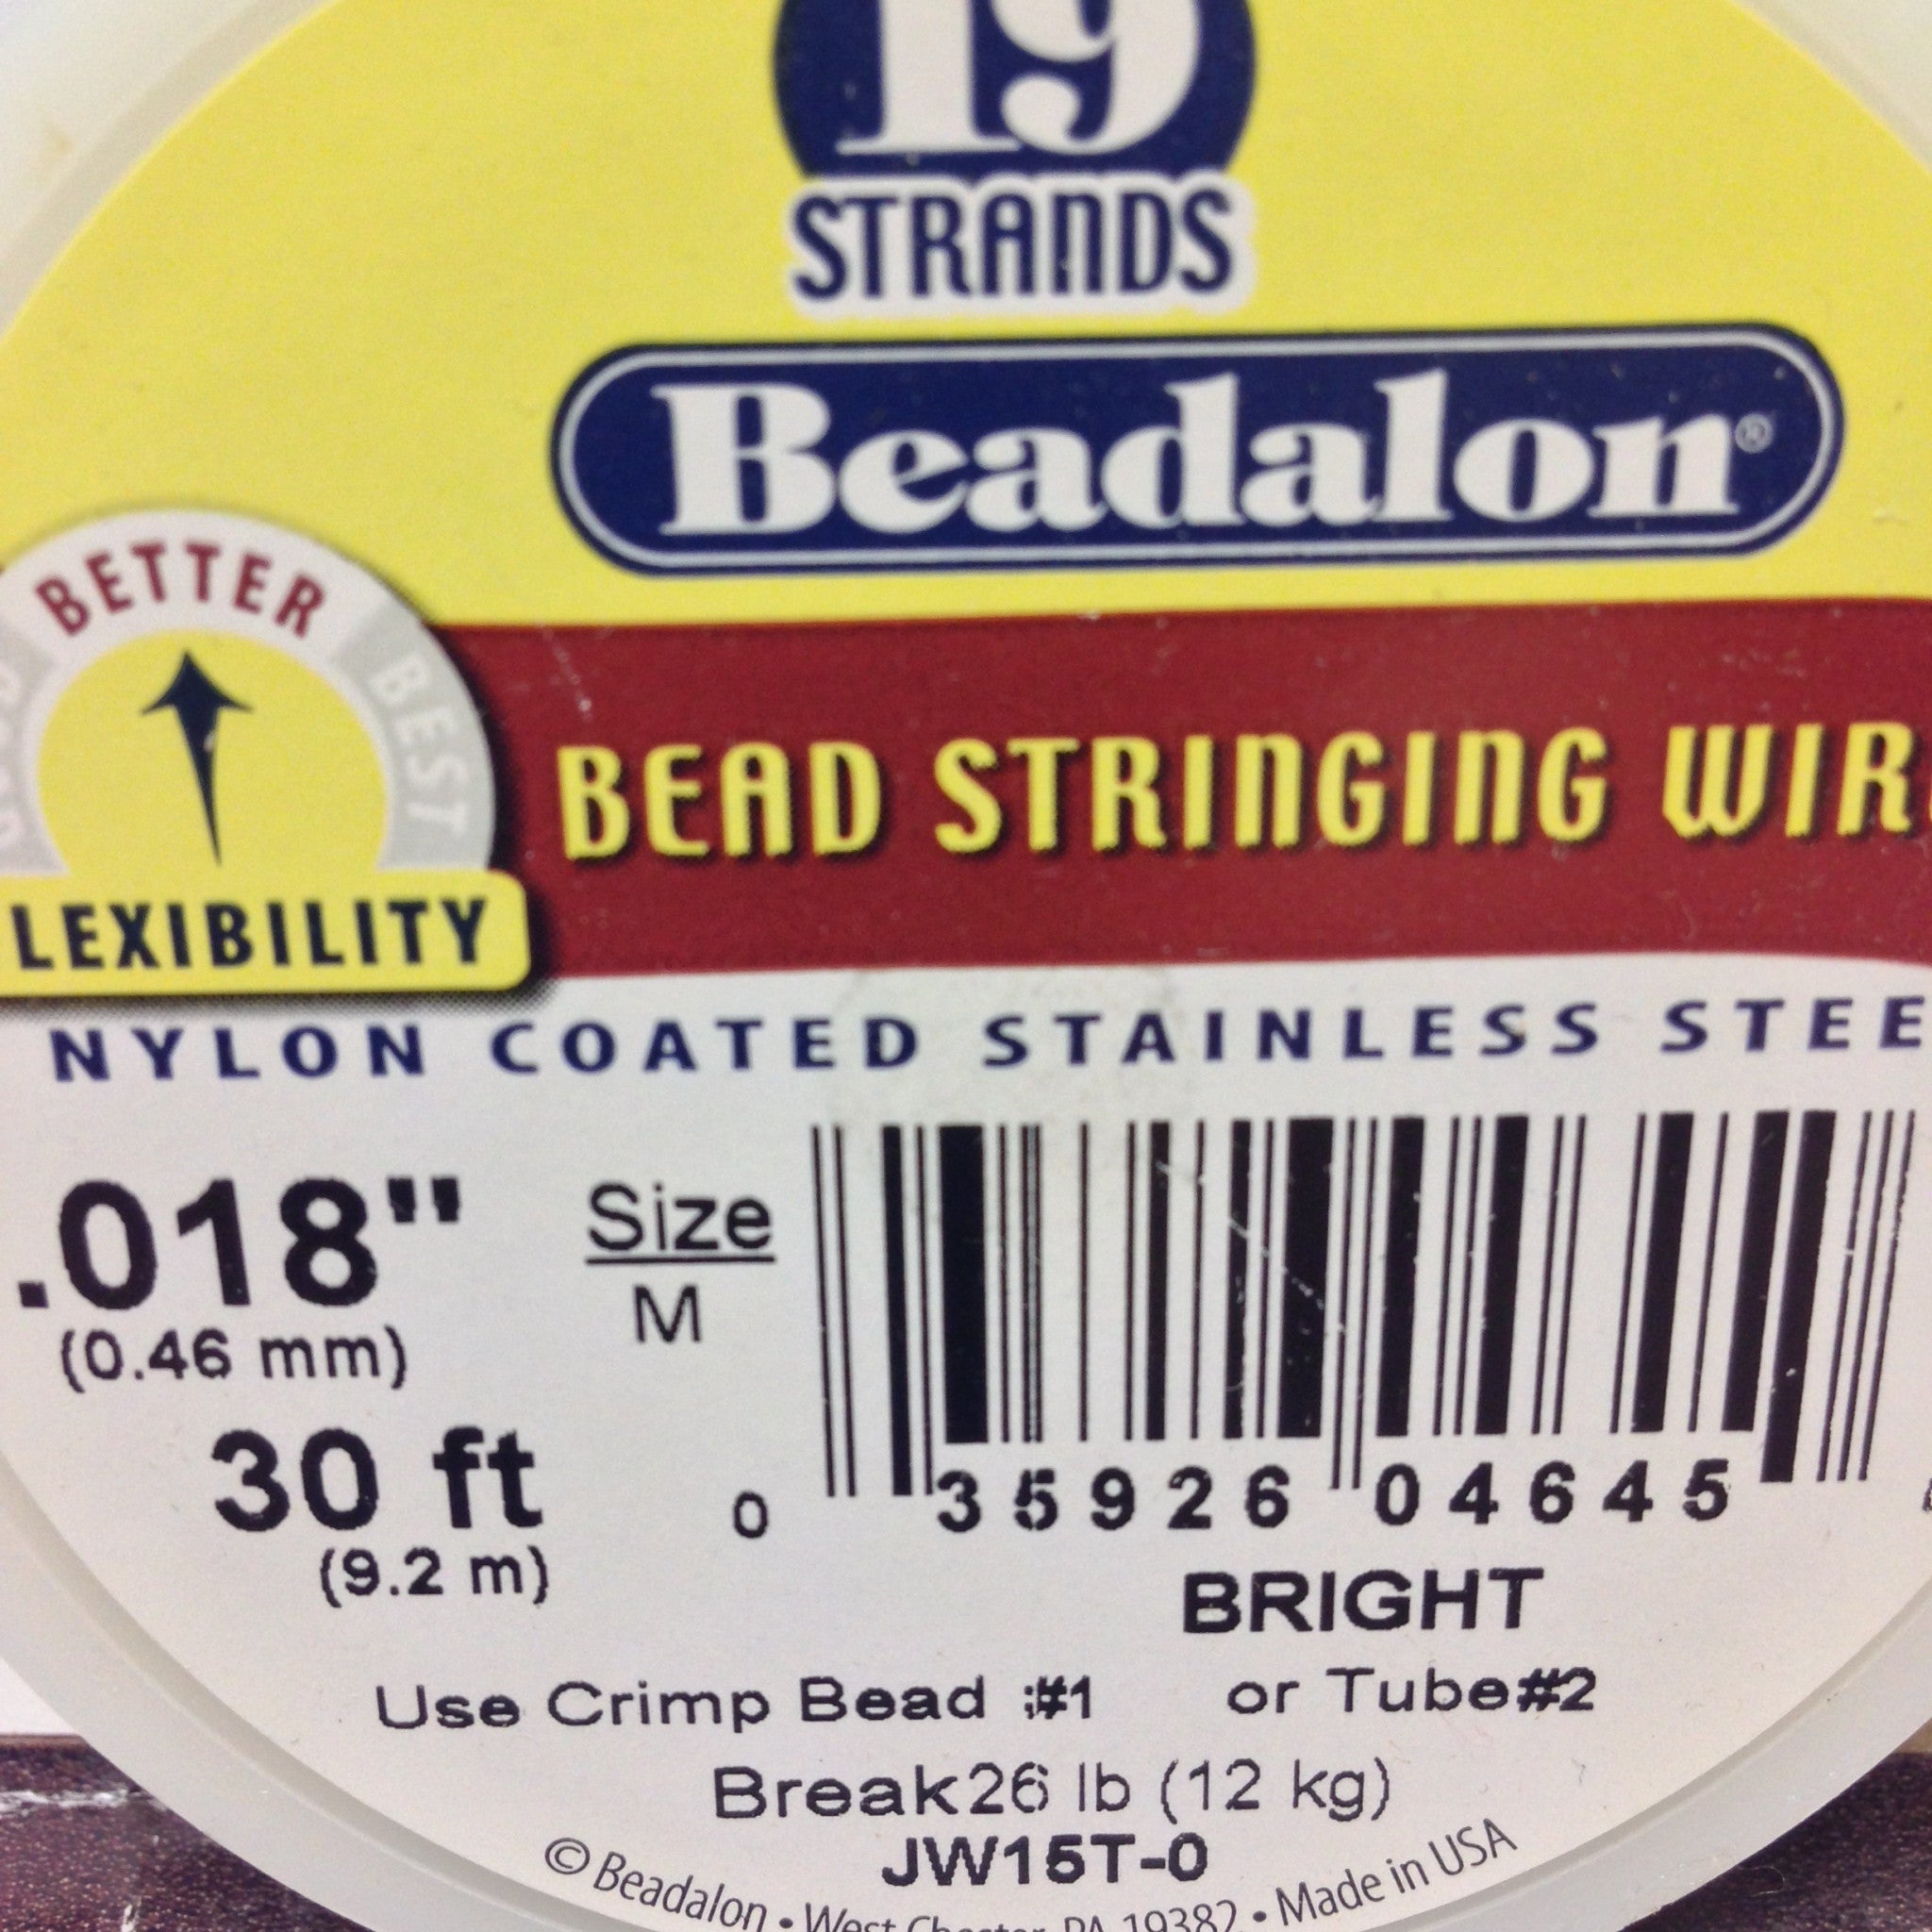 19 Strand Stainless Steel Bead Stringing Wire, .018 in (0.46 mm